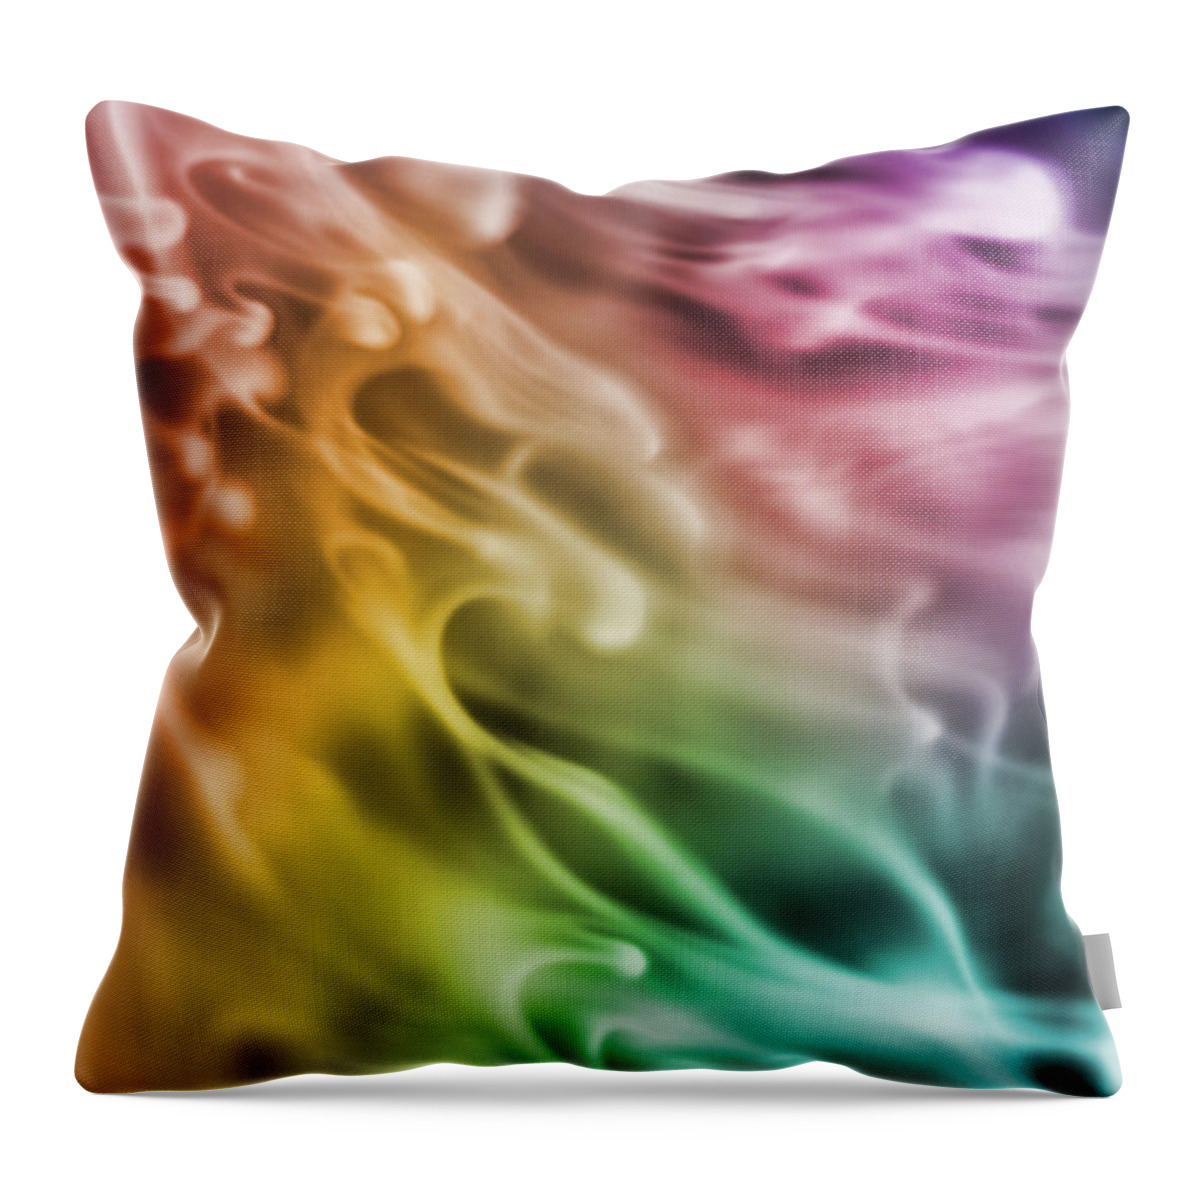 Colors Throw Pillow featuring the digital art Drift by Stephanie Hollingsworth